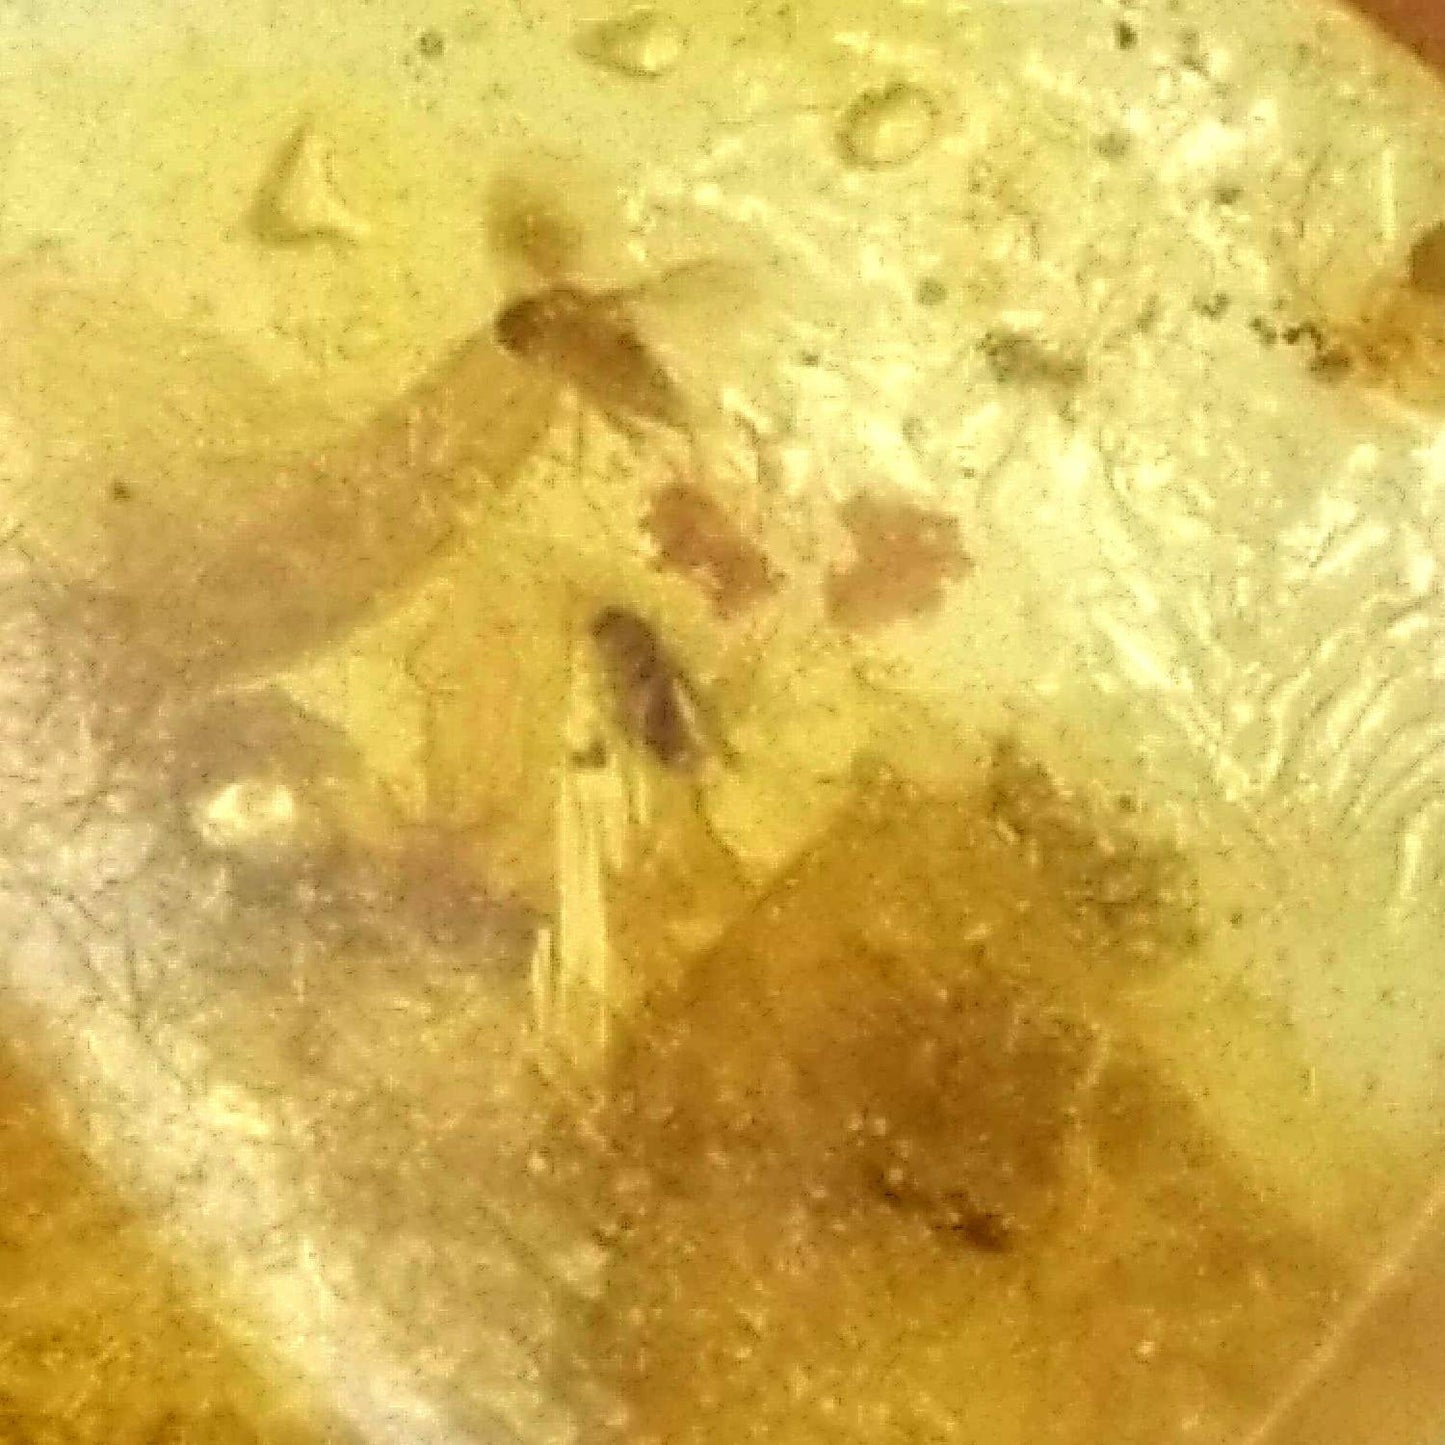 AMBER | Colombia | Polished A-18 | Fossil | Metaphysical |Bugs and Inclusions